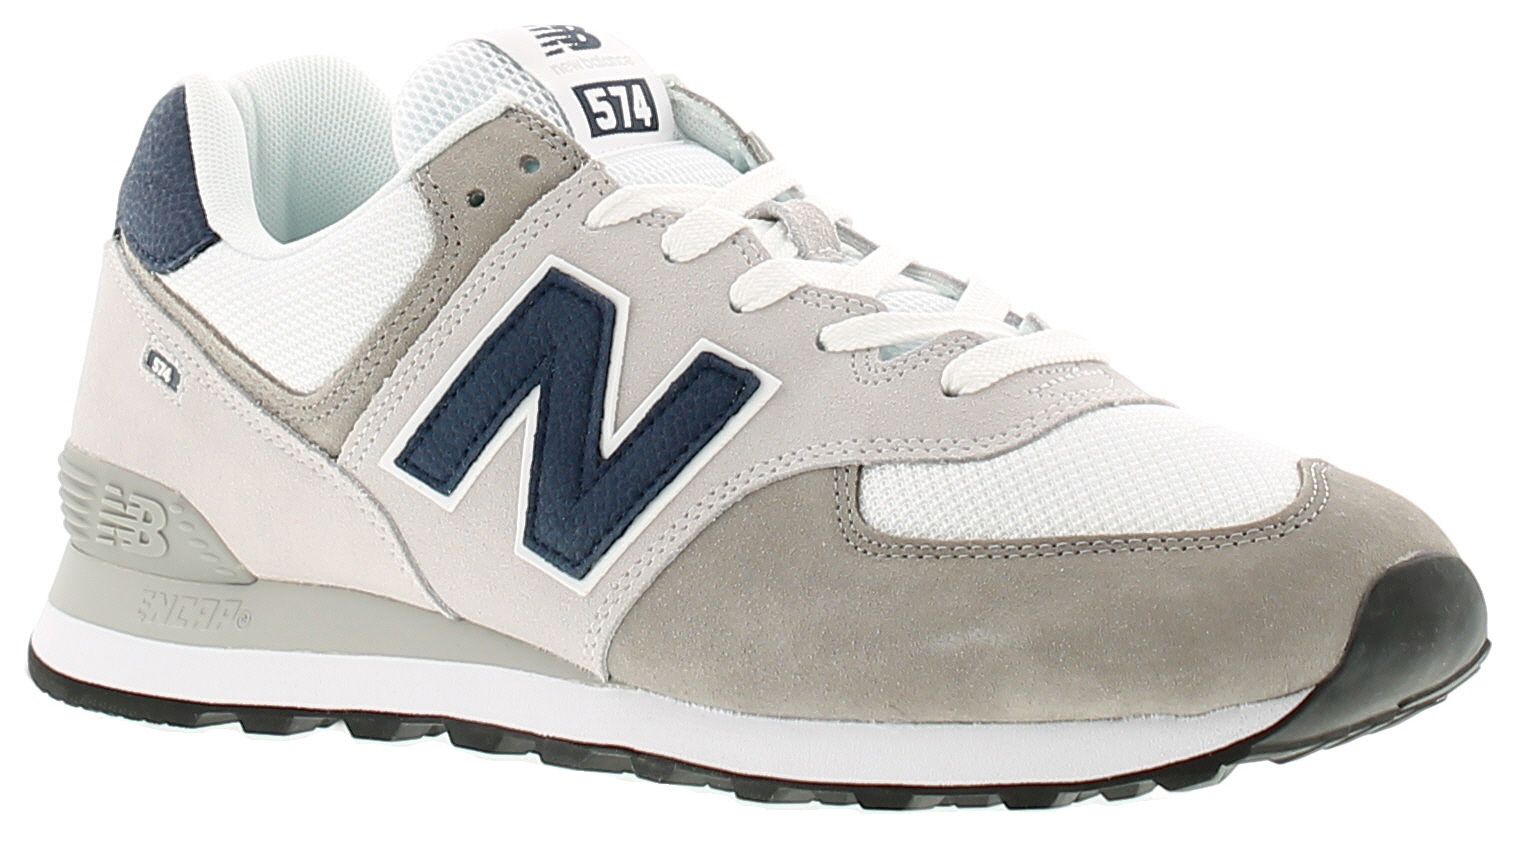 New Balance 574 leather mens trainers grey